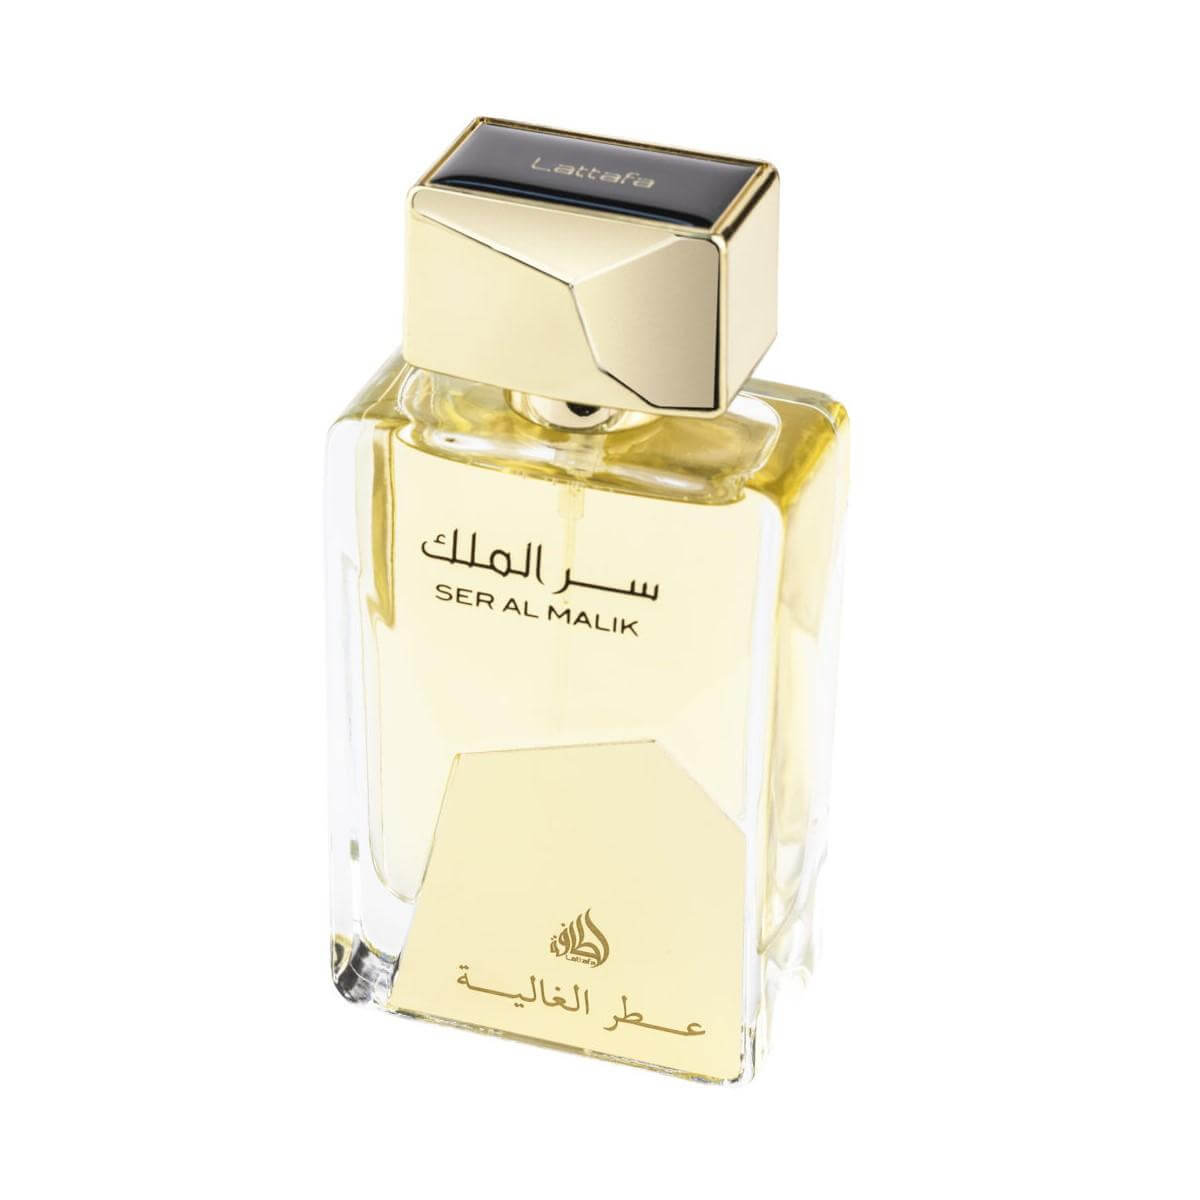 Ser Al Malik Attar Al Ghalia Perfume Eau De Parfum 100Ml By Lattafa 3 Lattafa Ser Al Malik Attar Al Ghalia Is The Fragrance That Opens With Energizing Oud Fragrance With Oriental Notes. The Fragrance Has The Best Answer To The Other Alternatives, And The Perfume Is Unisex. It'S The Perfume You Can Fall In Love With The First Smell. Soghaat Gifts &Amp; Fragrances